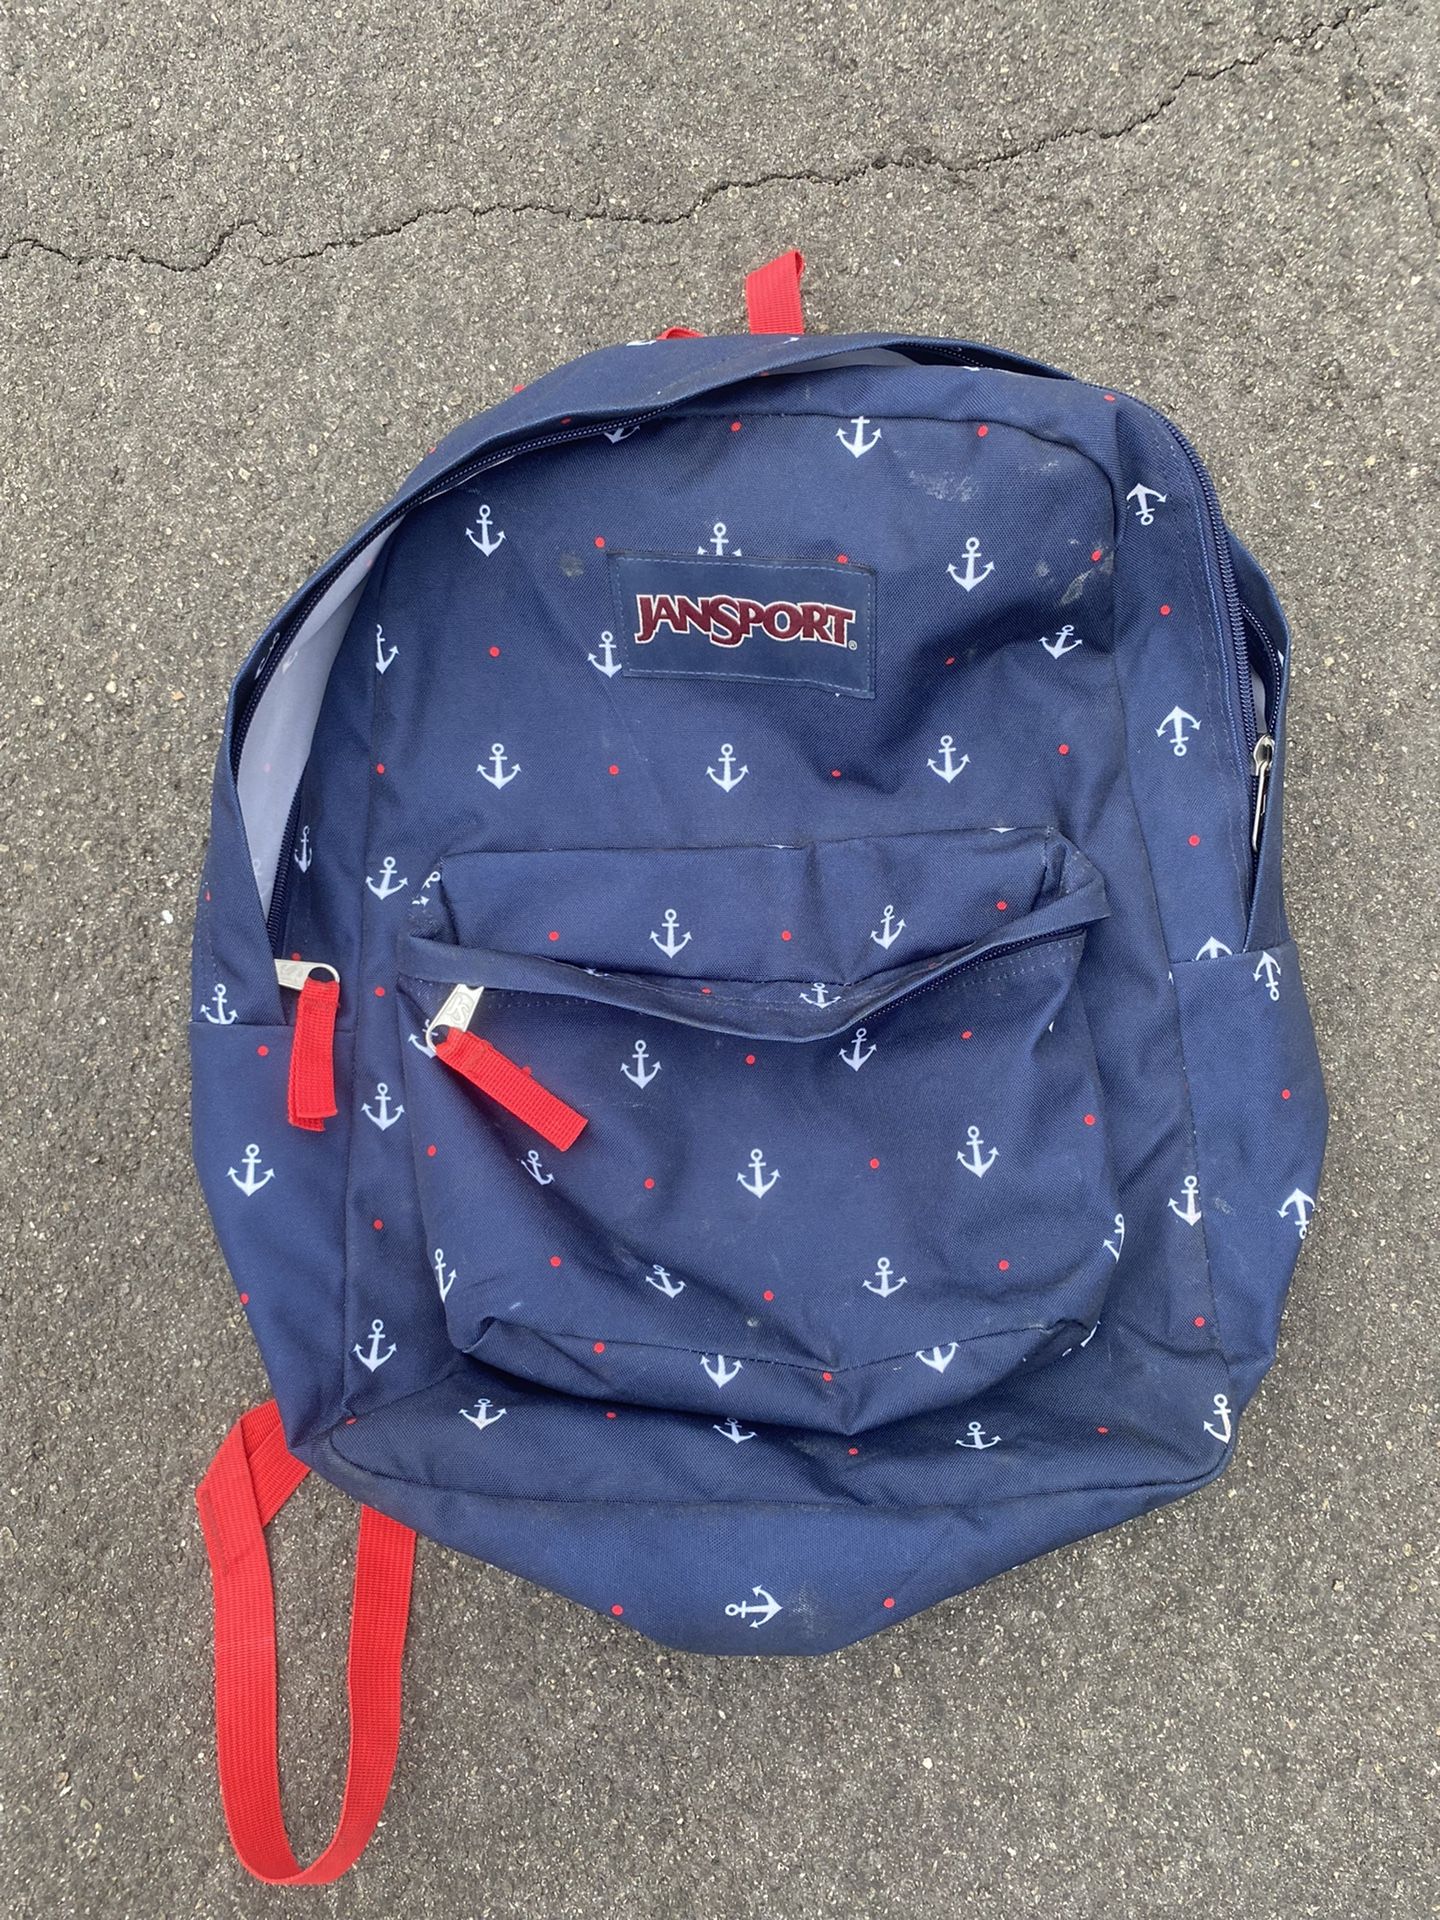 Jansport Backpack Blue And Red W/ Anchors